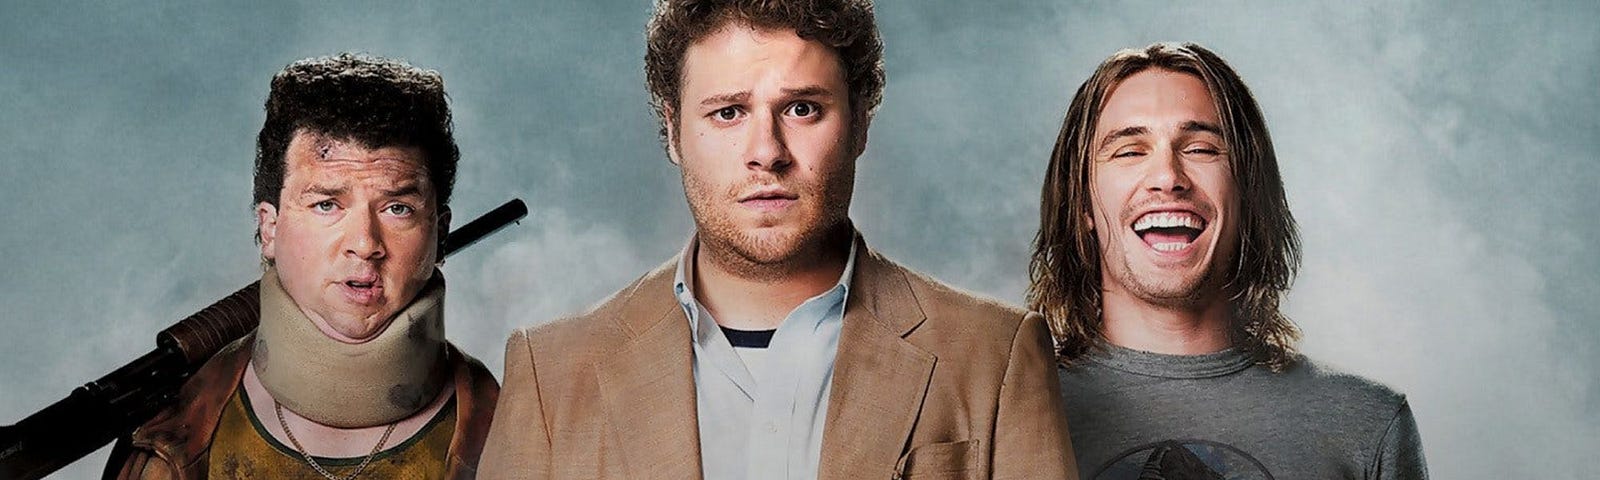 pineapple express full movie online free hd